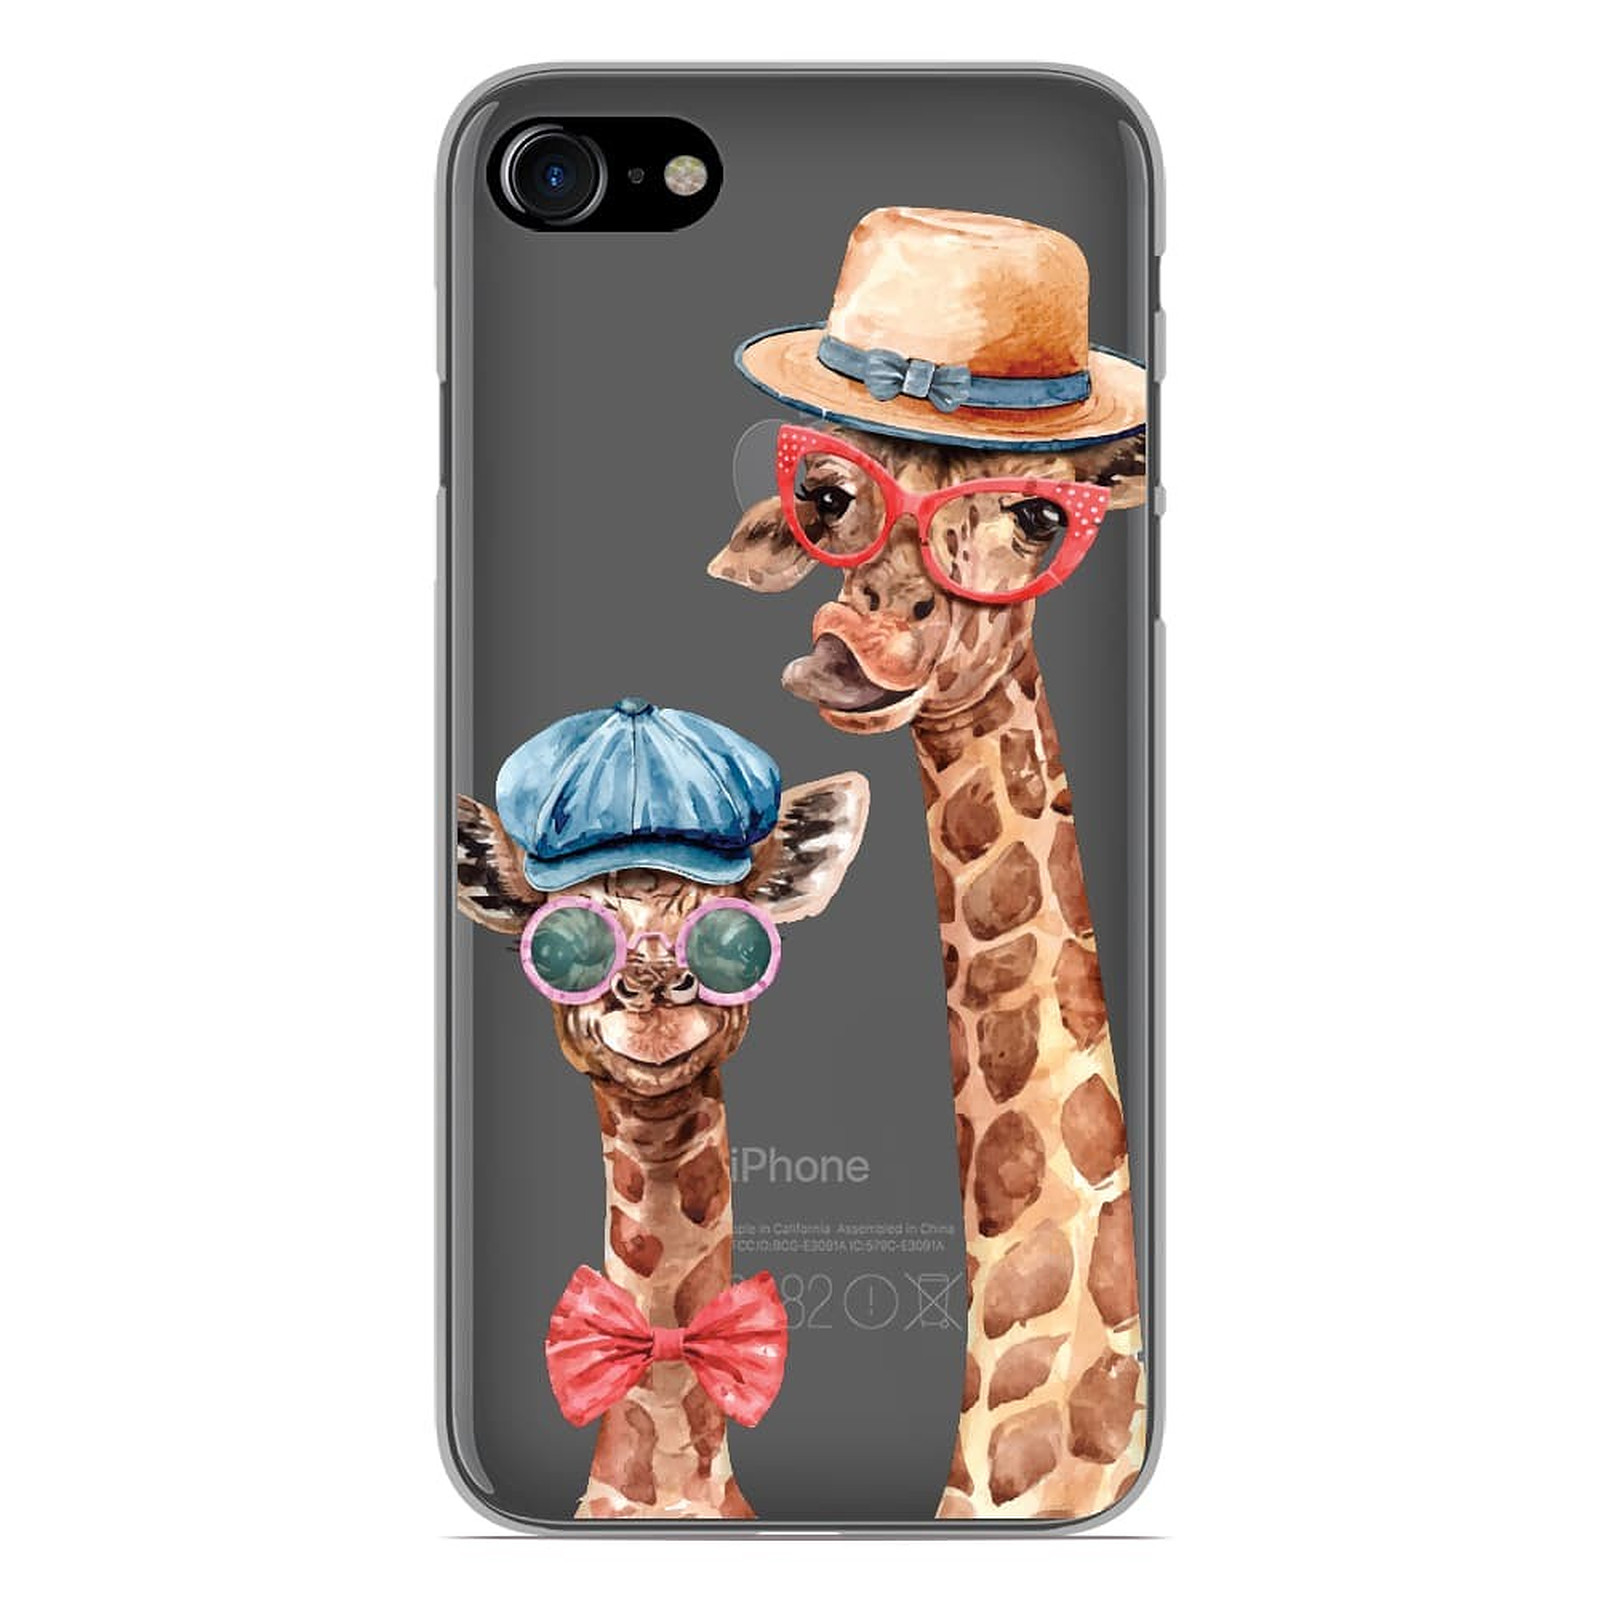 1001 Coques Coque silicone gel Apple iPhone 7 motif Funny Girafe - Coque telephone 1001Coques